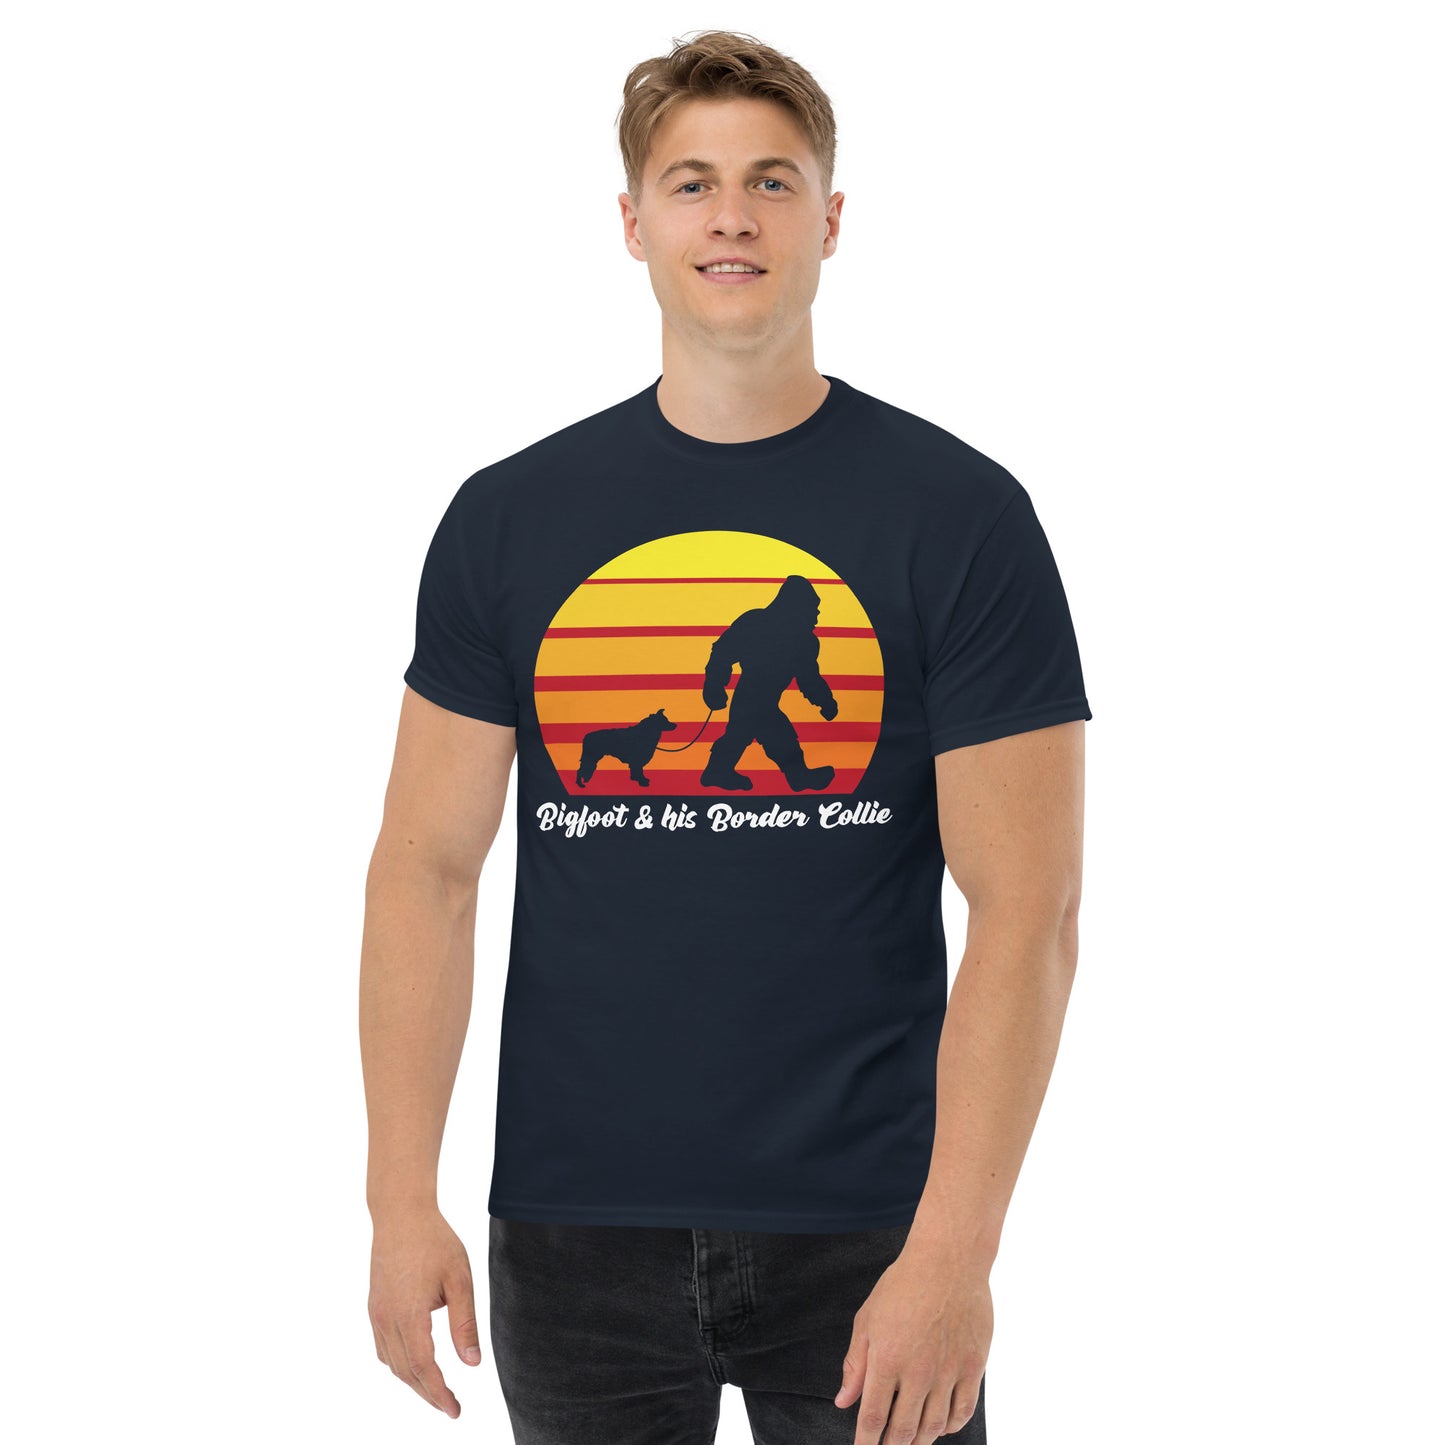 Big foot and his Border Collie men’s navy t-shirt by Dog Artistry.